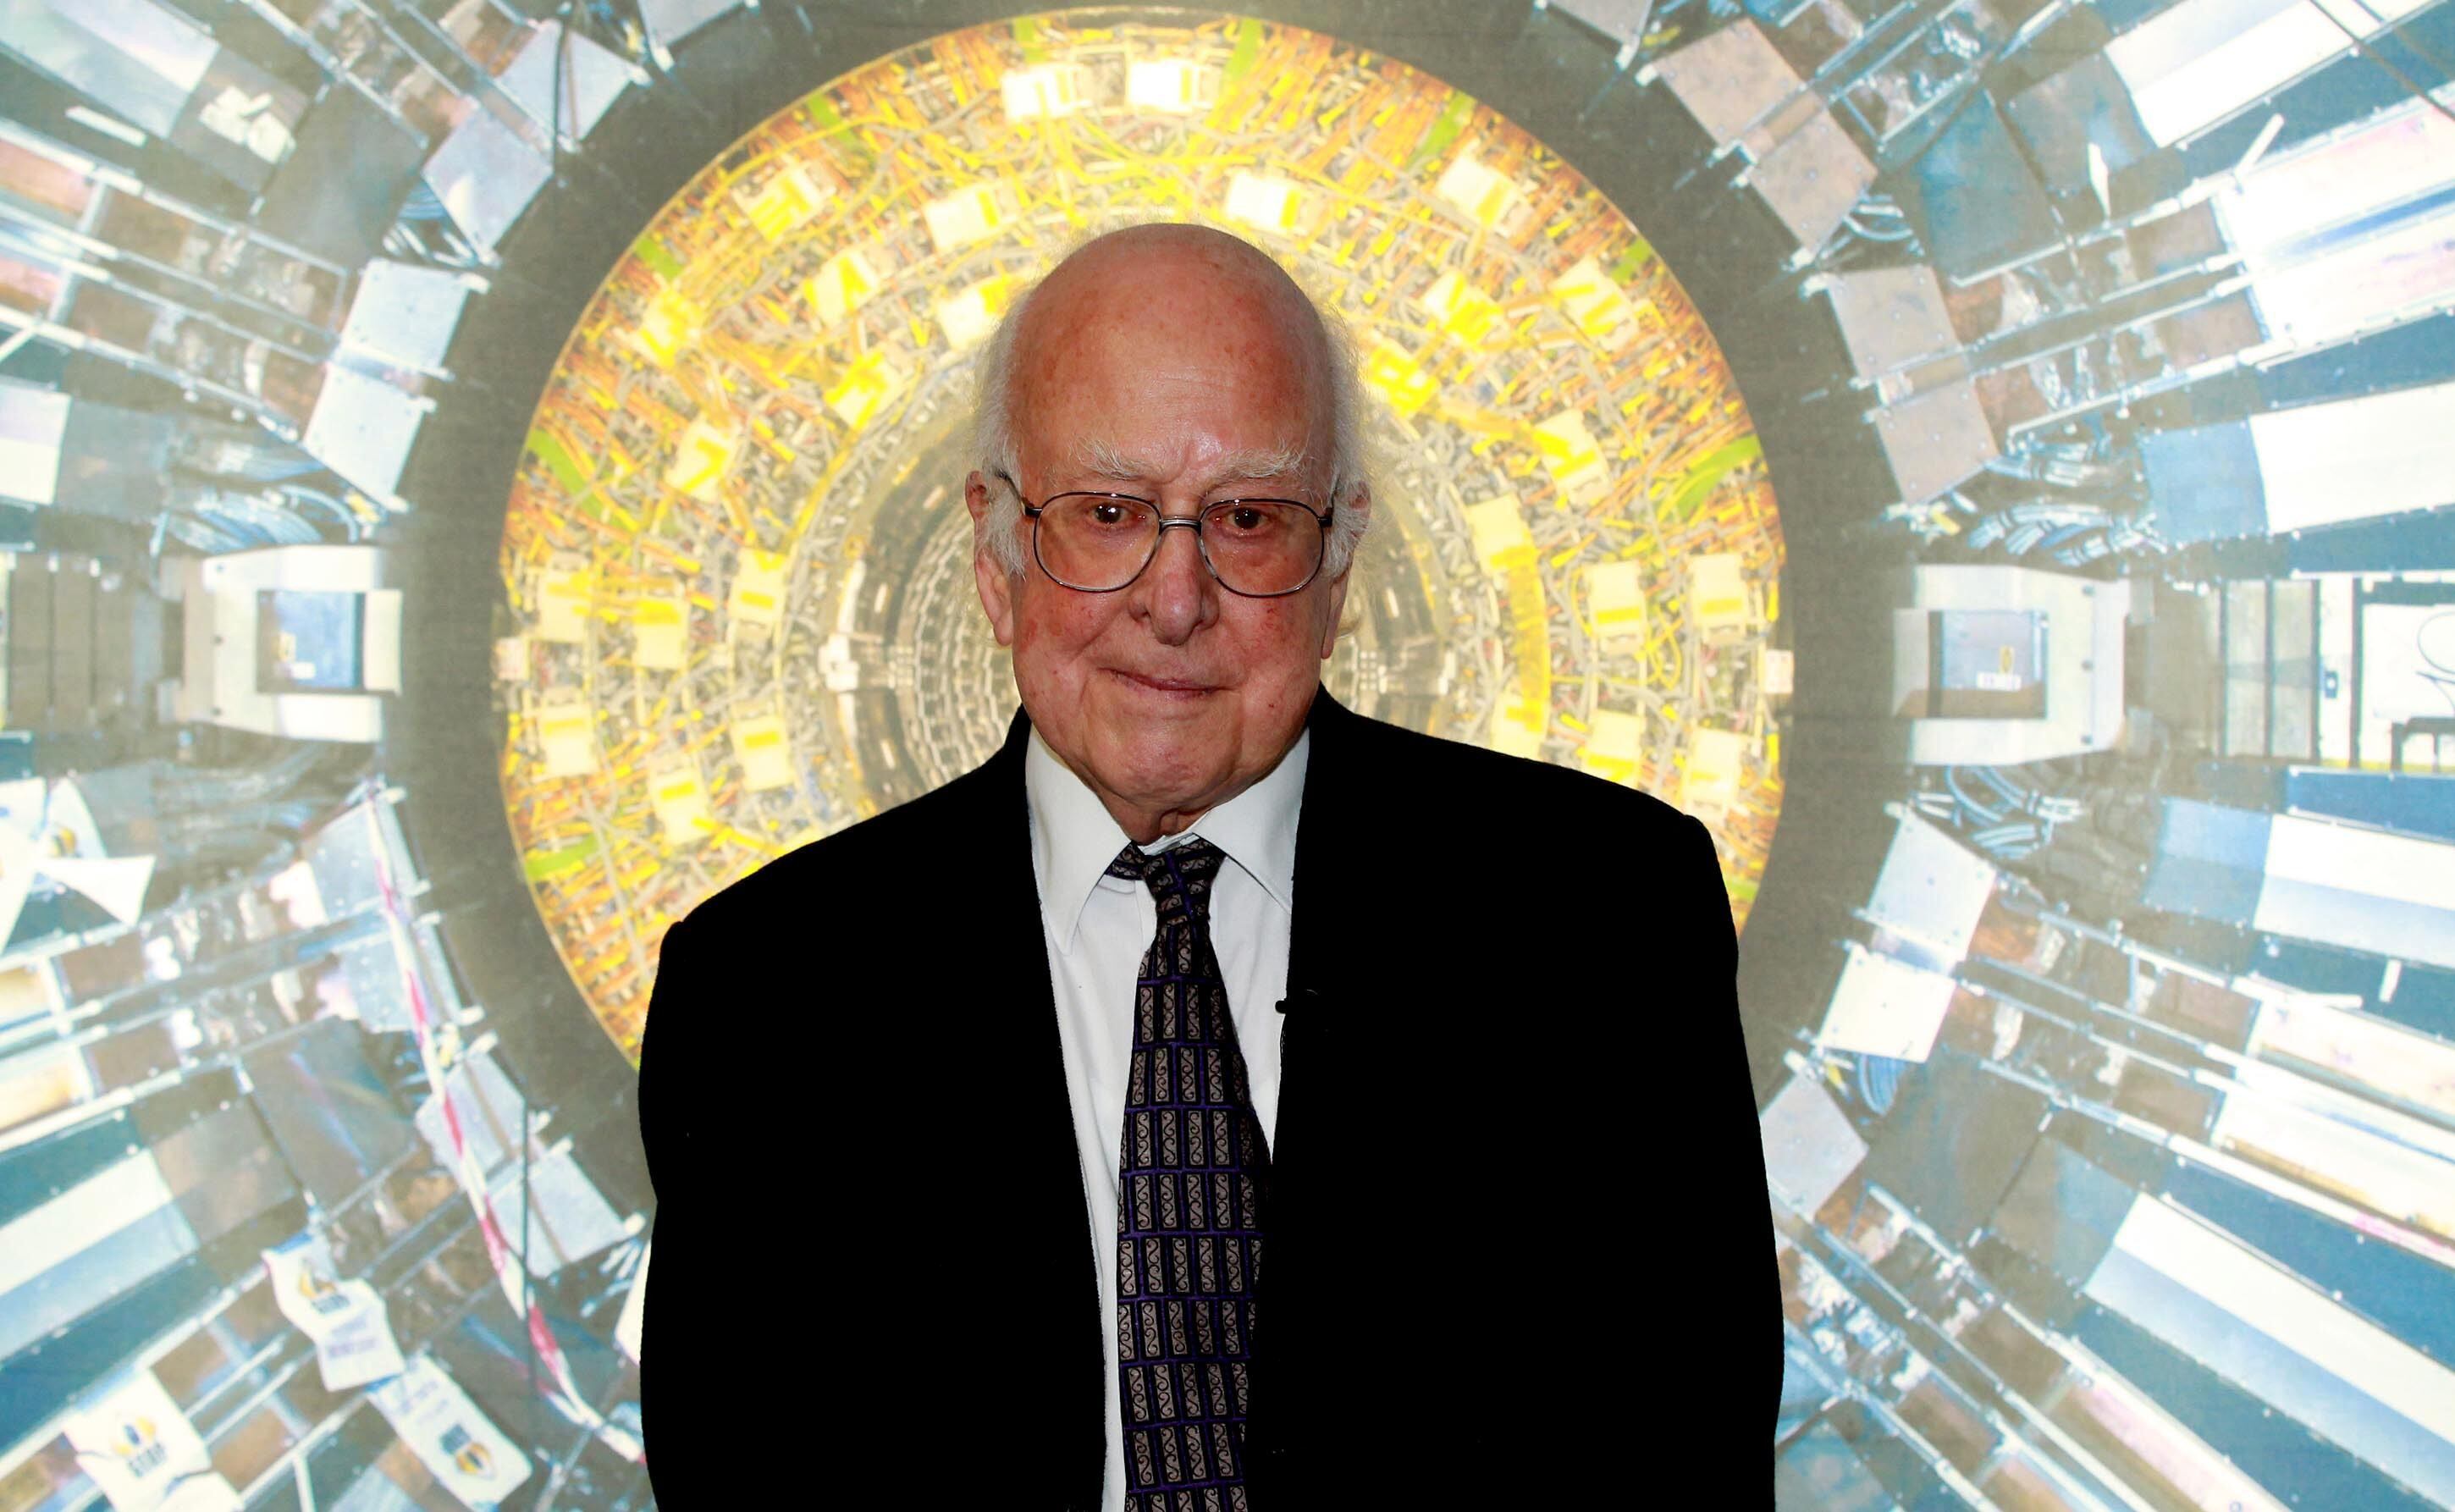 Nobel laureate Professor Peter Higgs at the Science Museum, London, ahead of the opening of the the museum's new Collider exhibition, which gives visitors a behind-the-scenes look at the Large Hadron Collider (LHC) and Cern particle physics laboratory in Geneva.   (Photo by Sean Dempsey/PA Images via Getty Images)